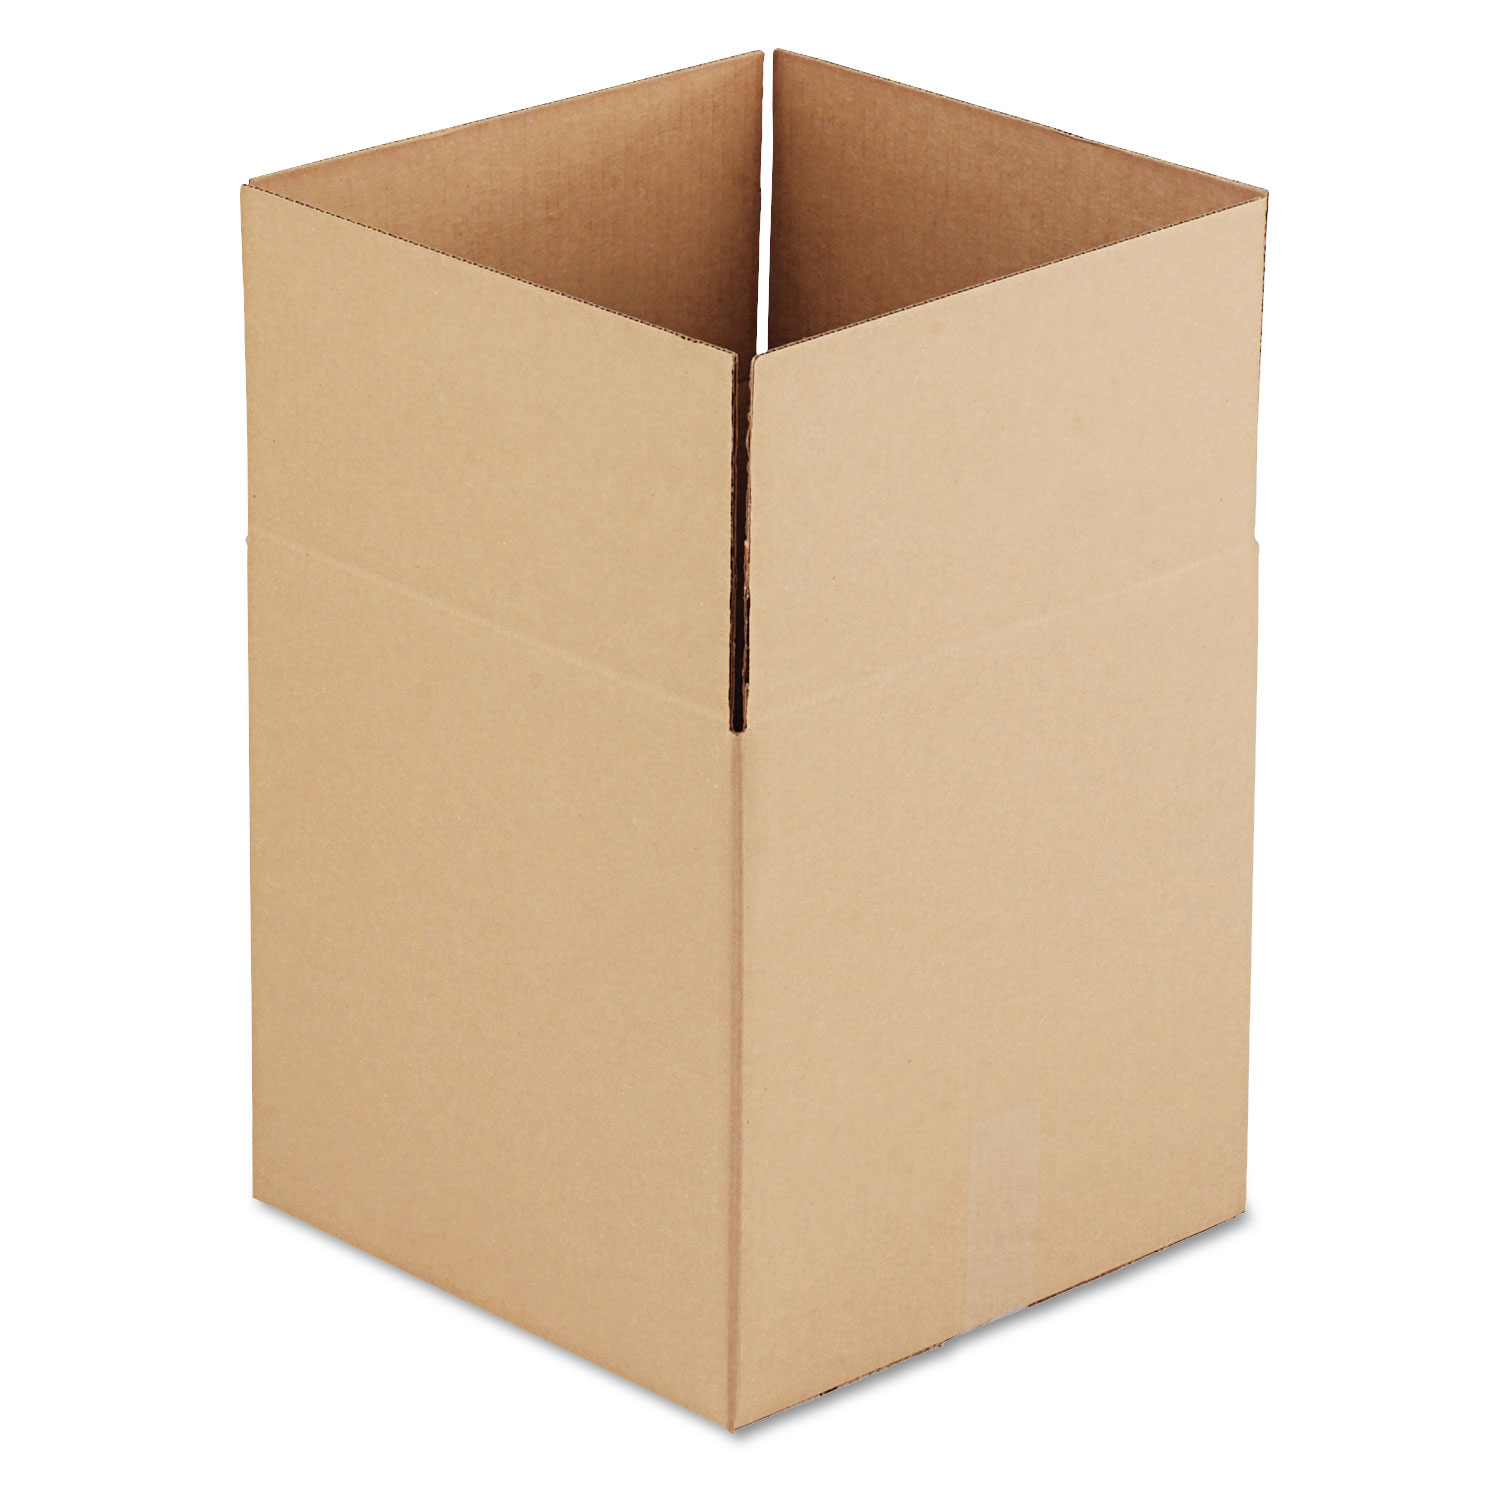  General Supply UFS141414 Cubed Fixed-Depth Shipping Boxes, Regular Slotted Container (RSC), 14 x 14 x 14, Brown Kraft, 25/Bundle (UFS141414) 